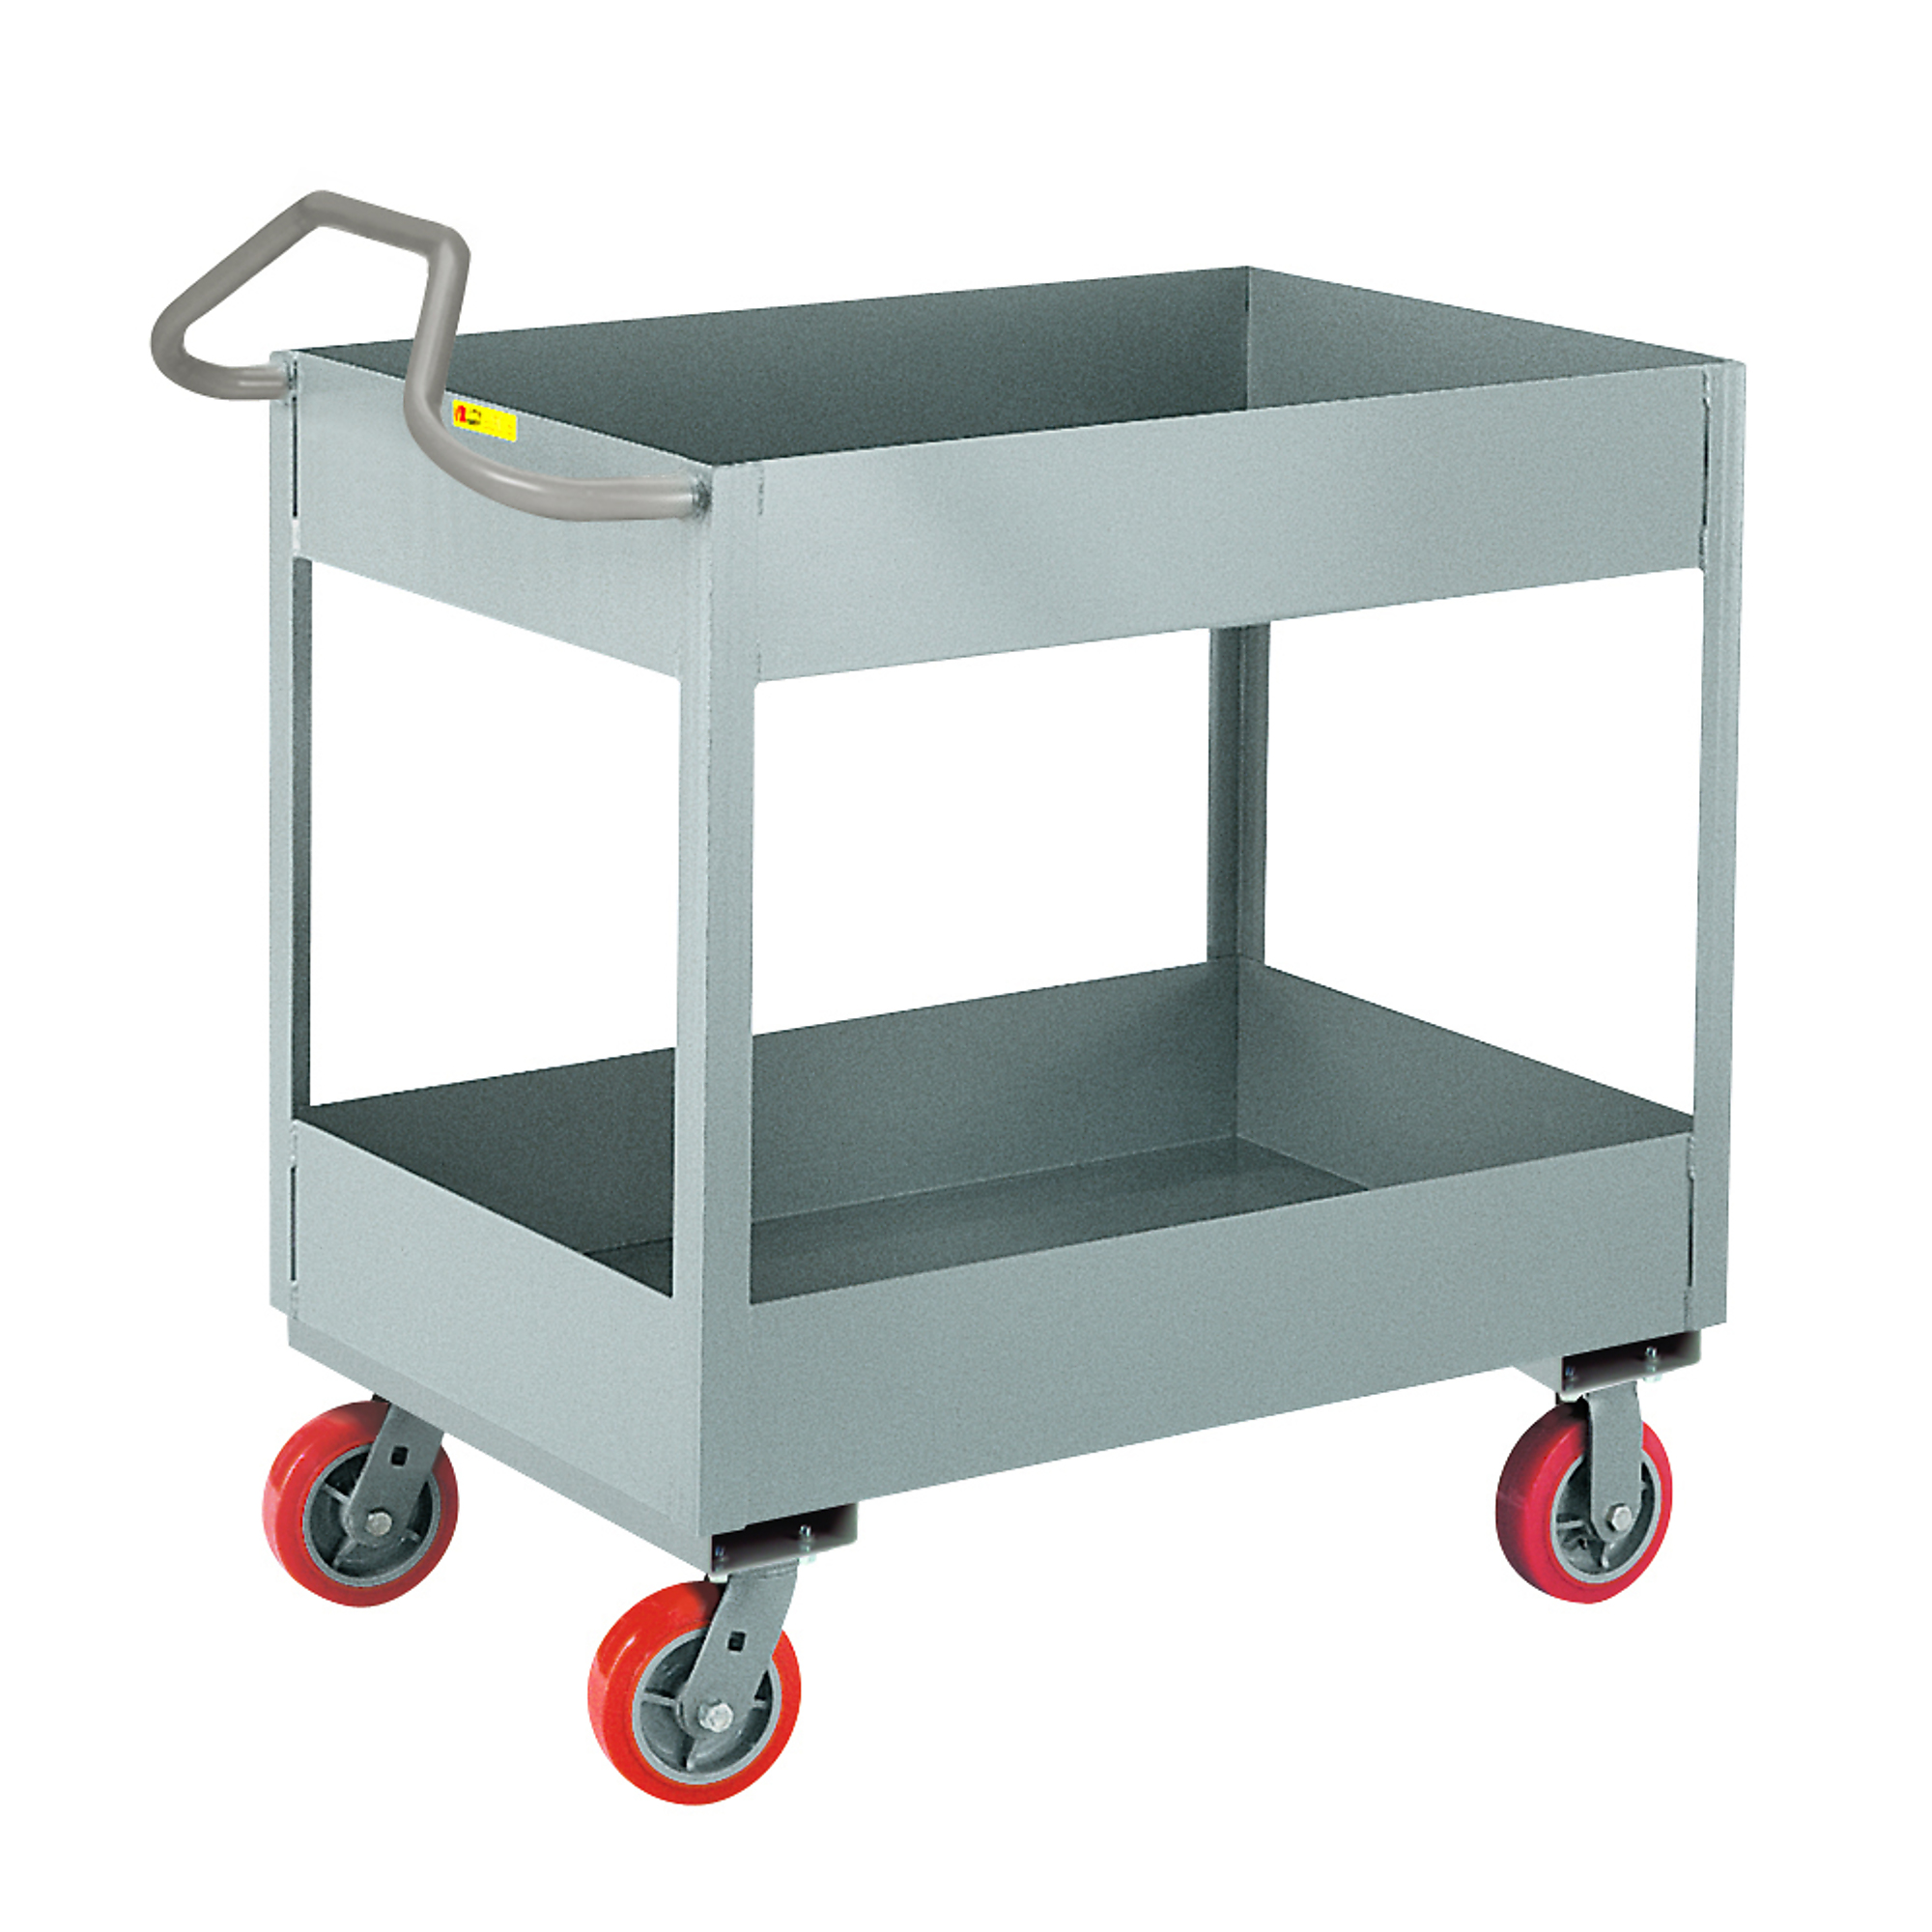 Little Giant, 6Inch Deep Shelf Truck, Ergo Handle, 24x36, 3600 lbs, Total Capacity 3600 lb, Shelves (qty.) 2, Material Carbon Steel, Model ENDS-2436X6